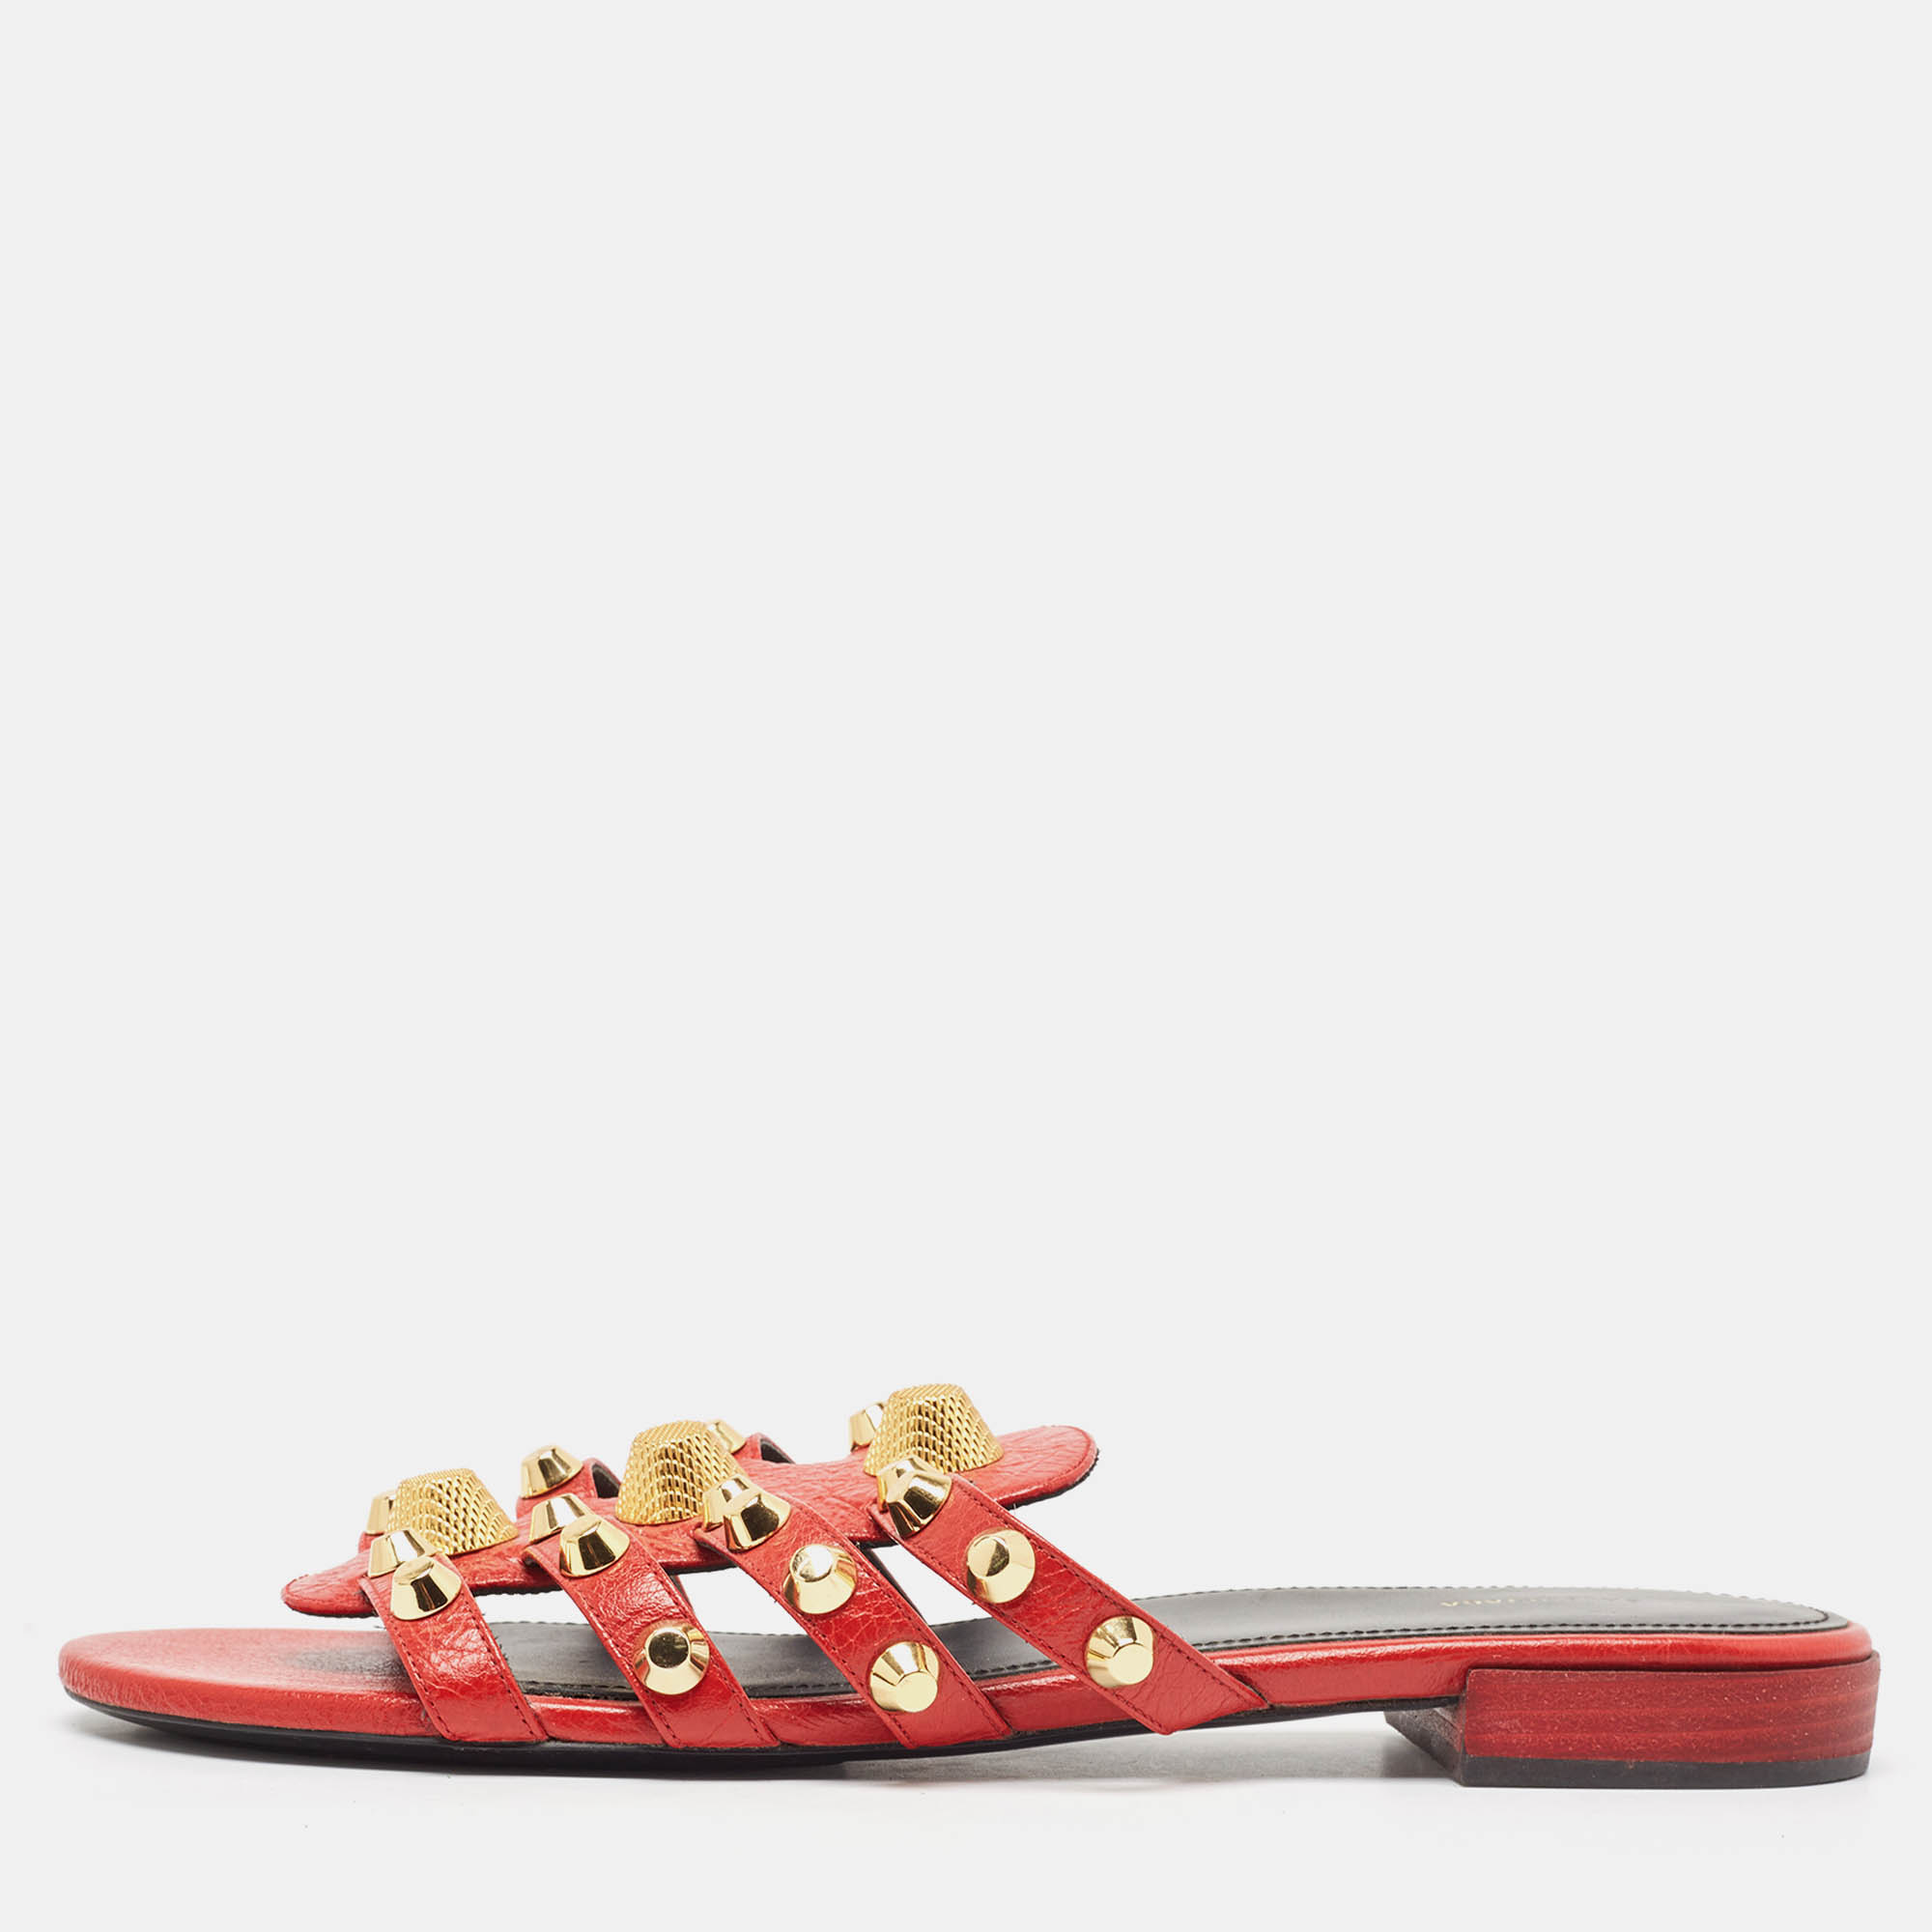 Balenciaga red leather studded arena flat slides size 41